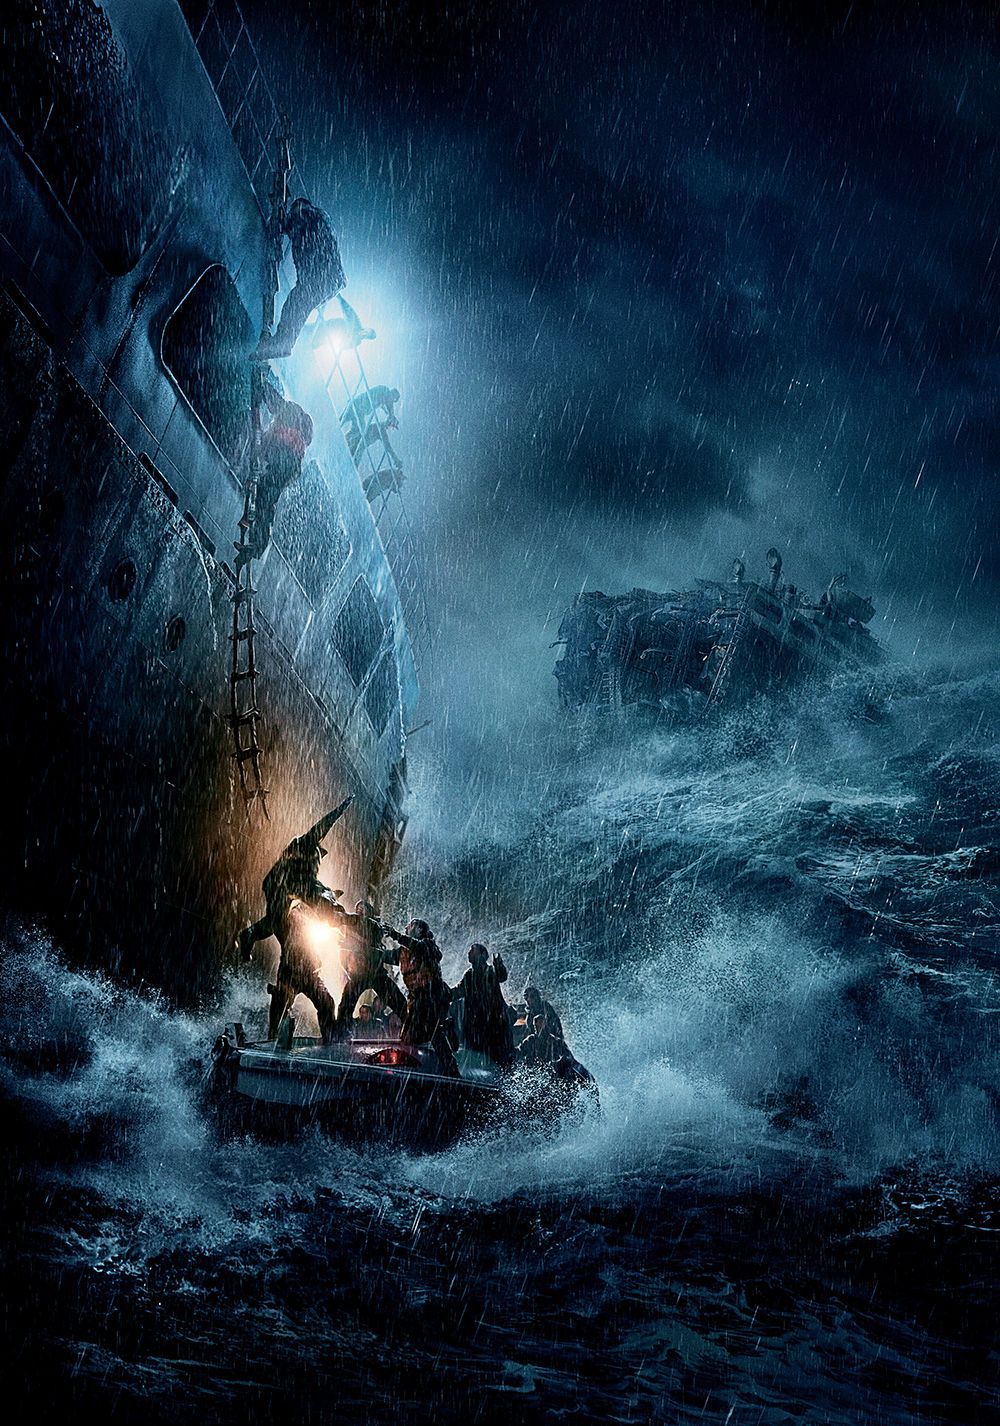 The Finest Hours (2016) survivors, room for 12. The finest